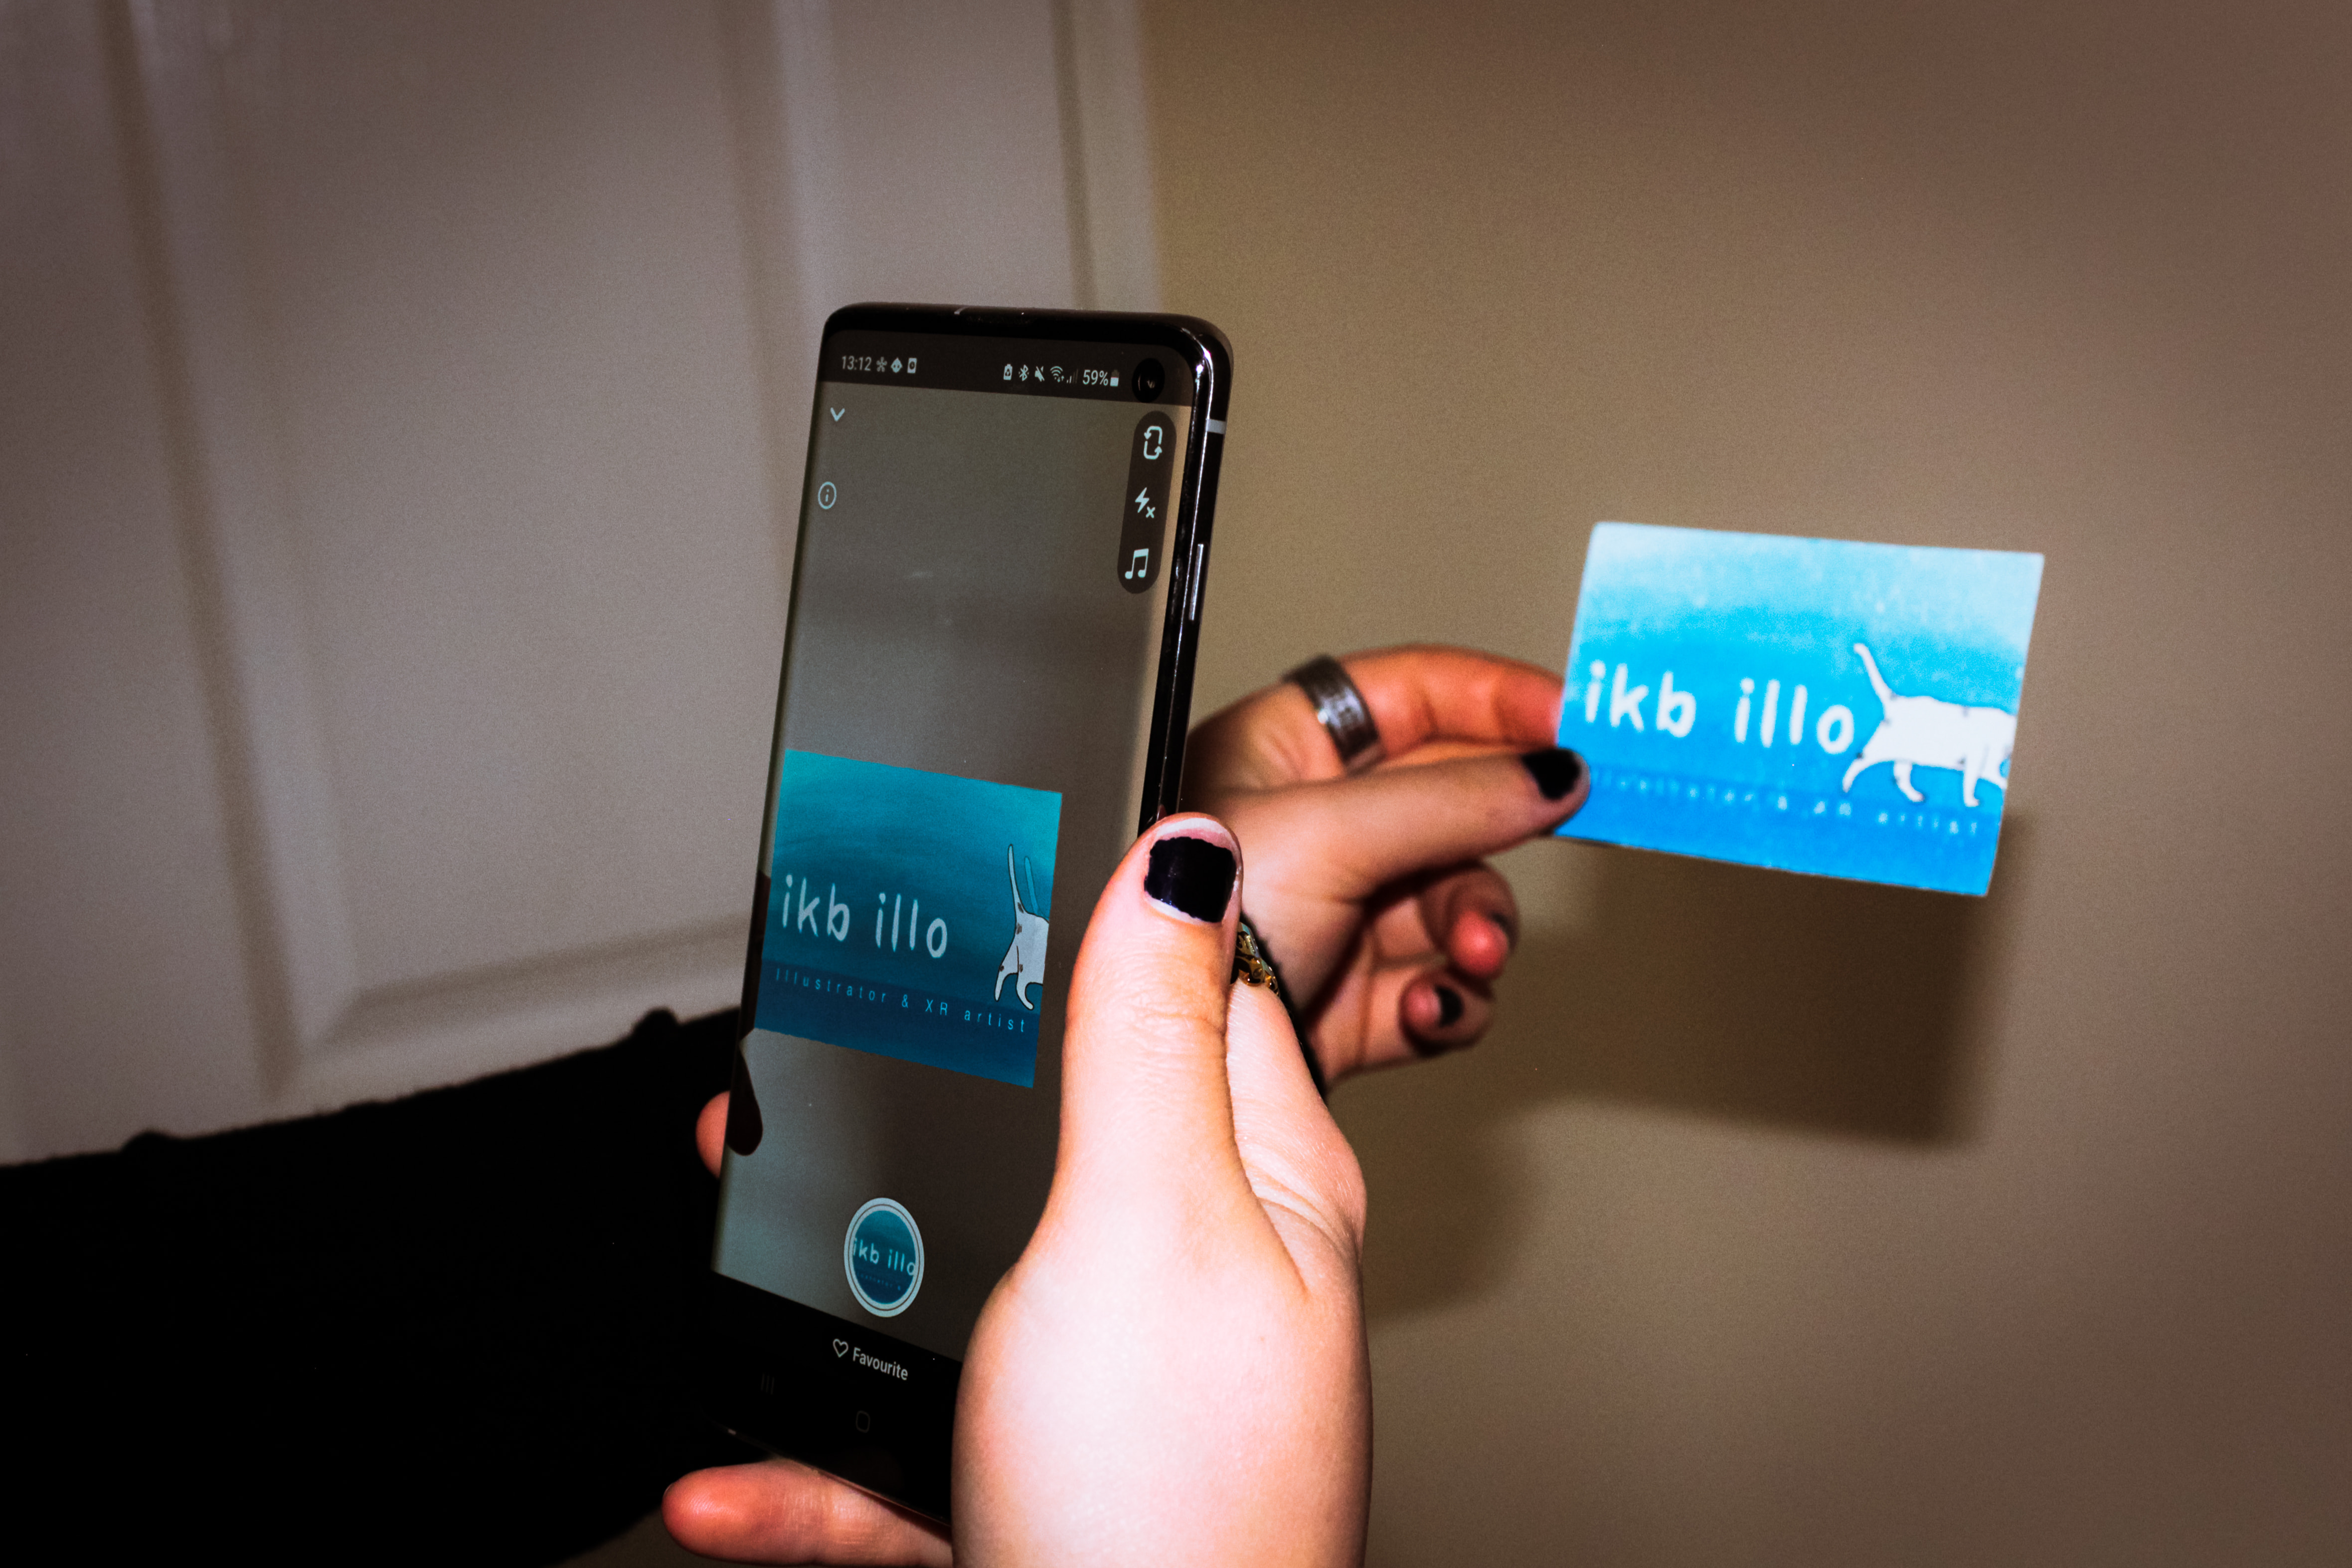 Photograph of a phone scanning the business card and showing an animation of a cat walking across the business card to reveal the words ikb illo.